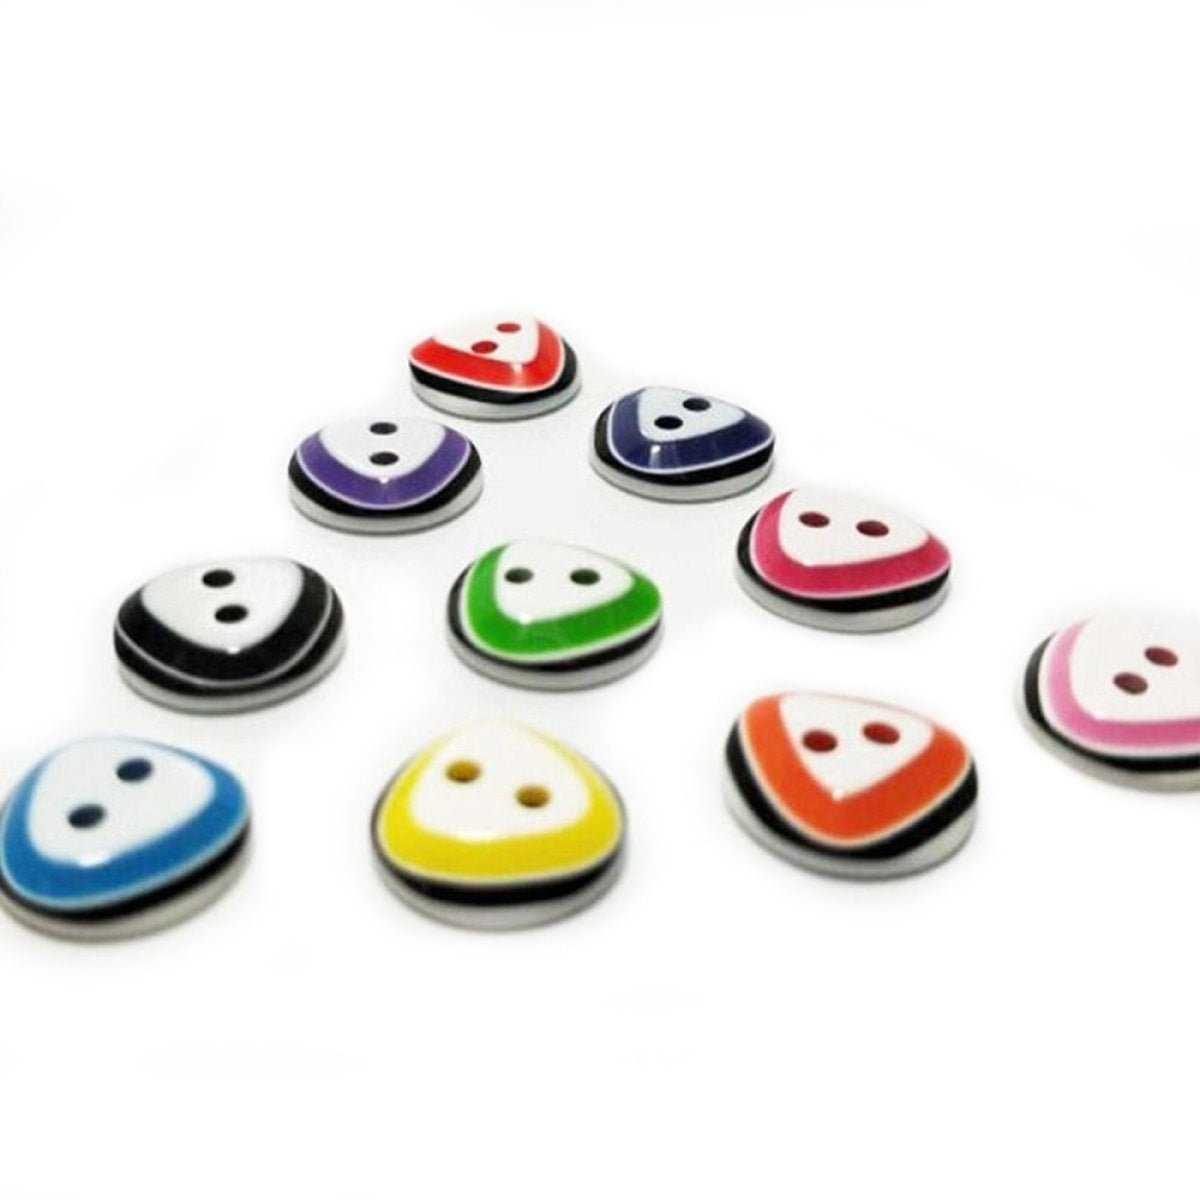 100pcs 12mm Triangular Shape 2 Hole Buttons Mixed Colour Children's Clothing Sewing Triangle - Asia Sell